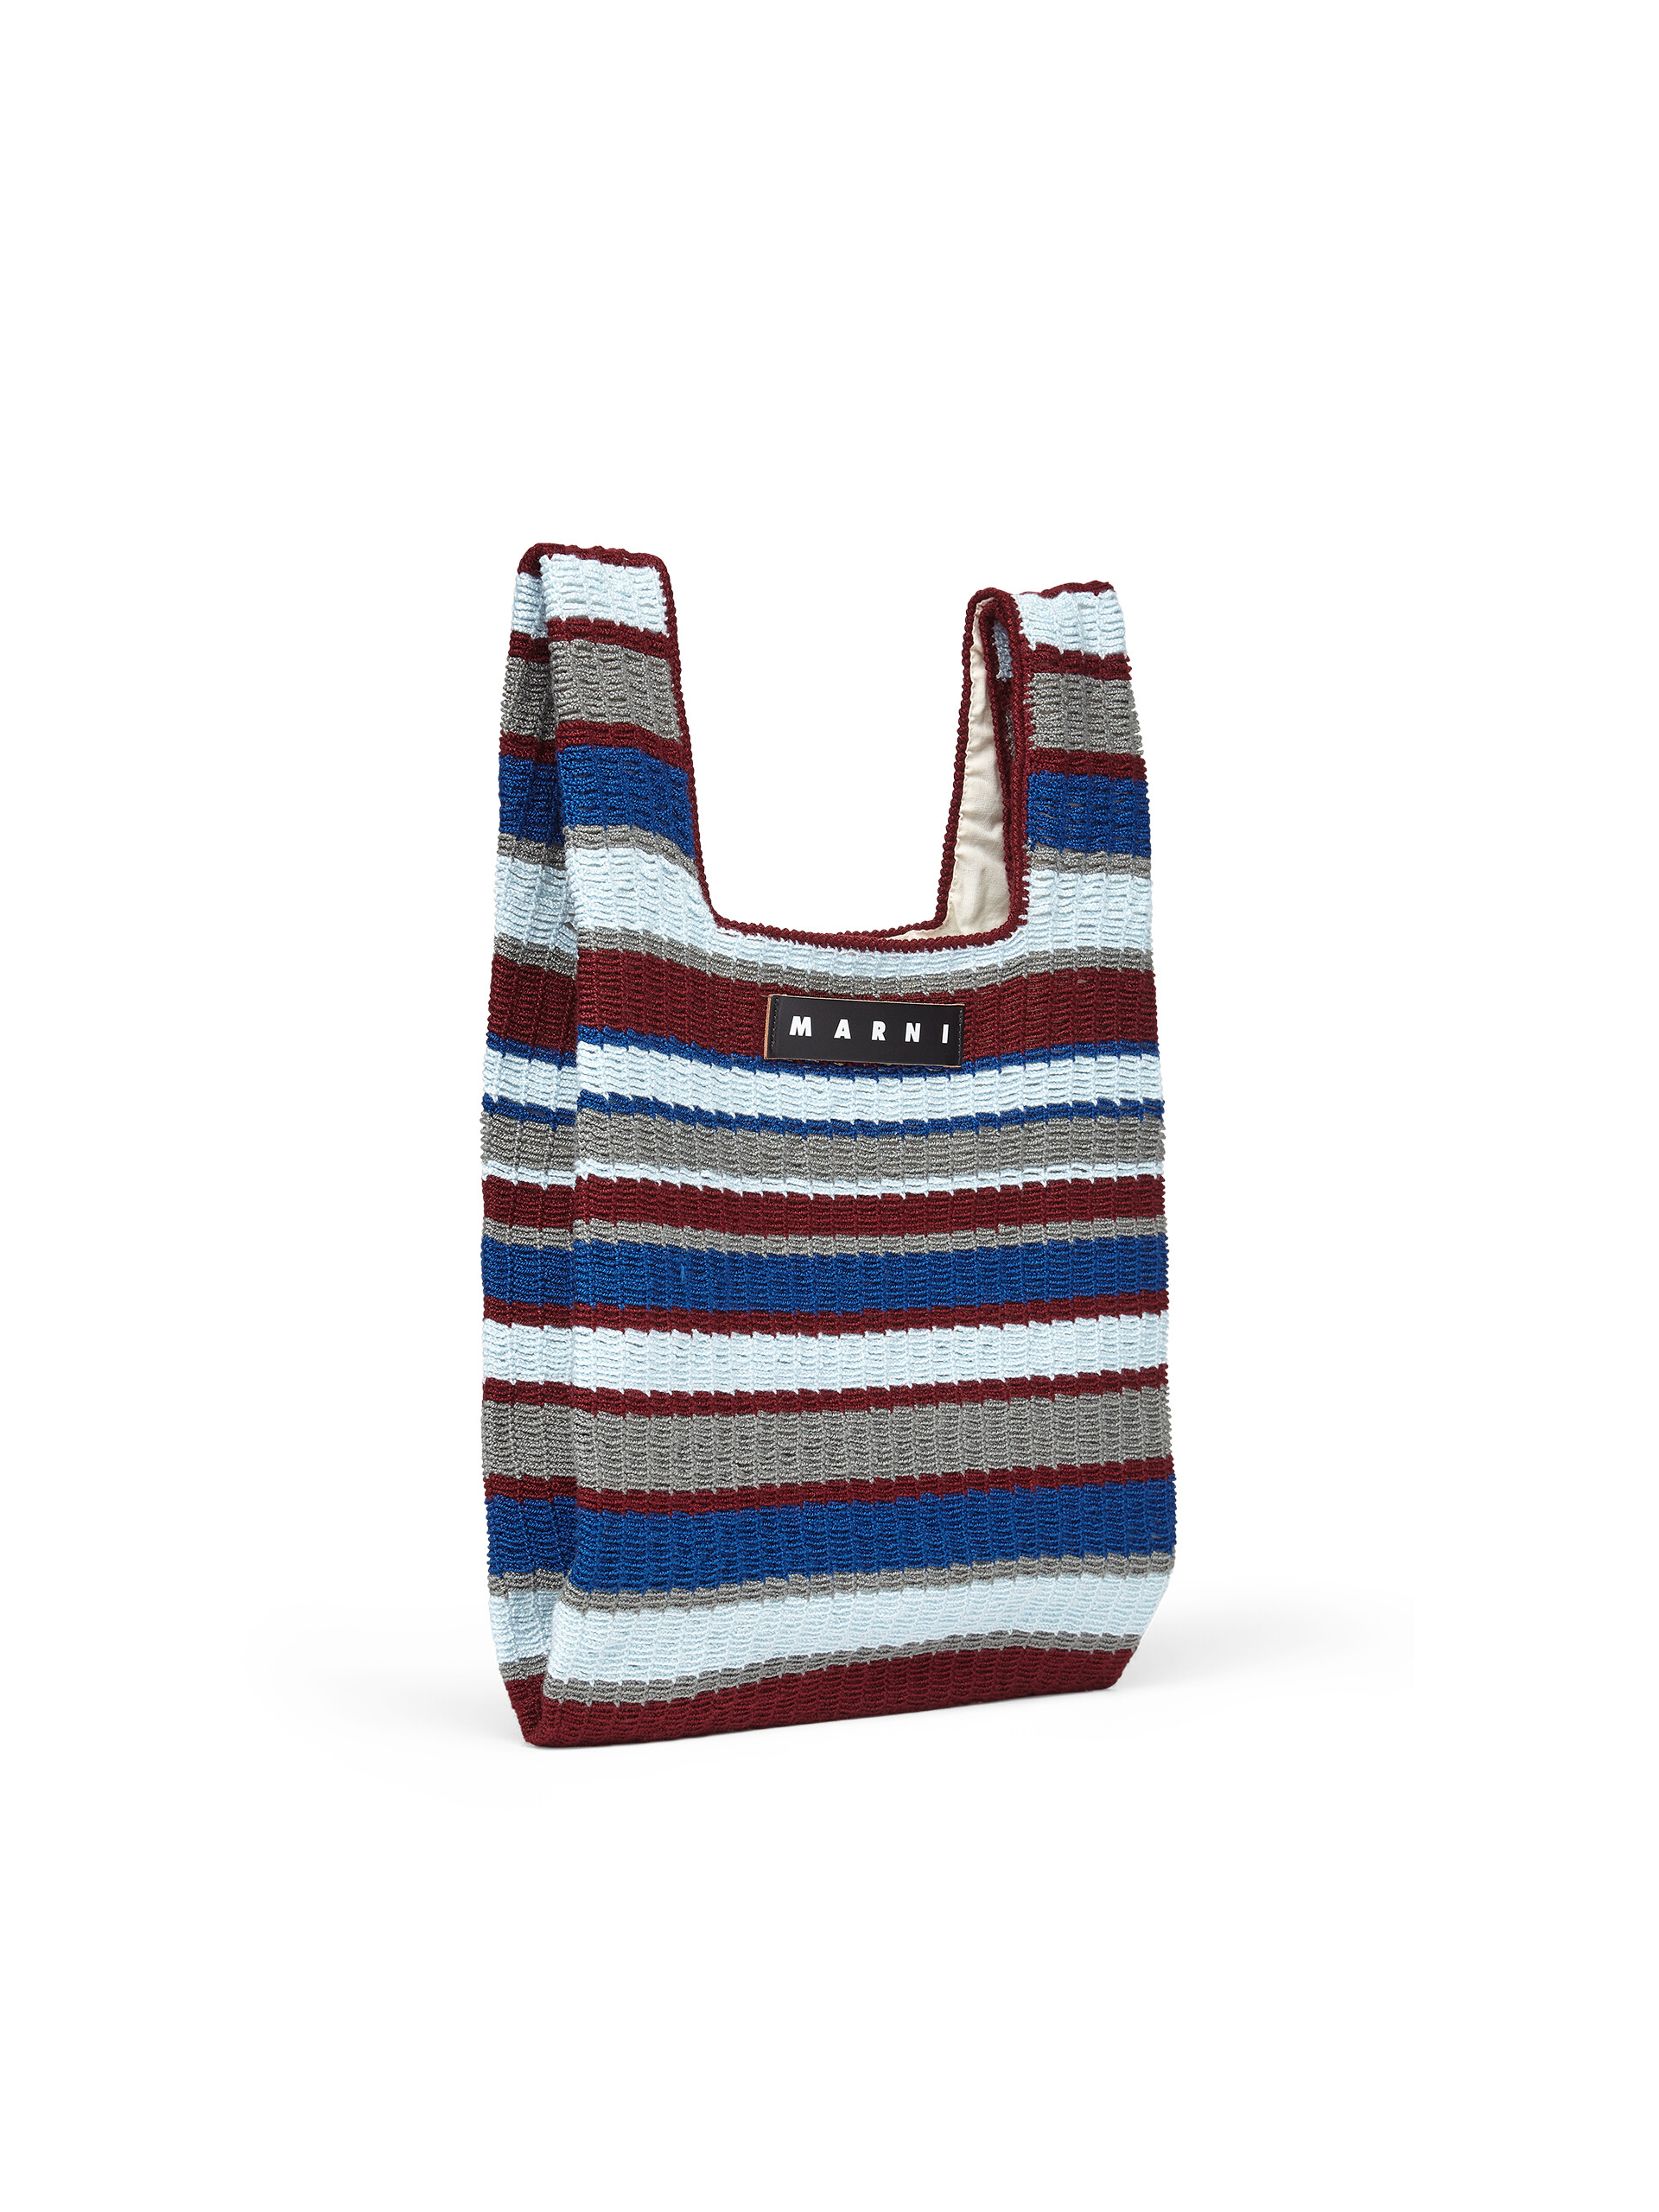 Shopping bag MARNI MARKET with striped motif in burgundy blue grey and pale blue crochet polyester - Bags - Image 2